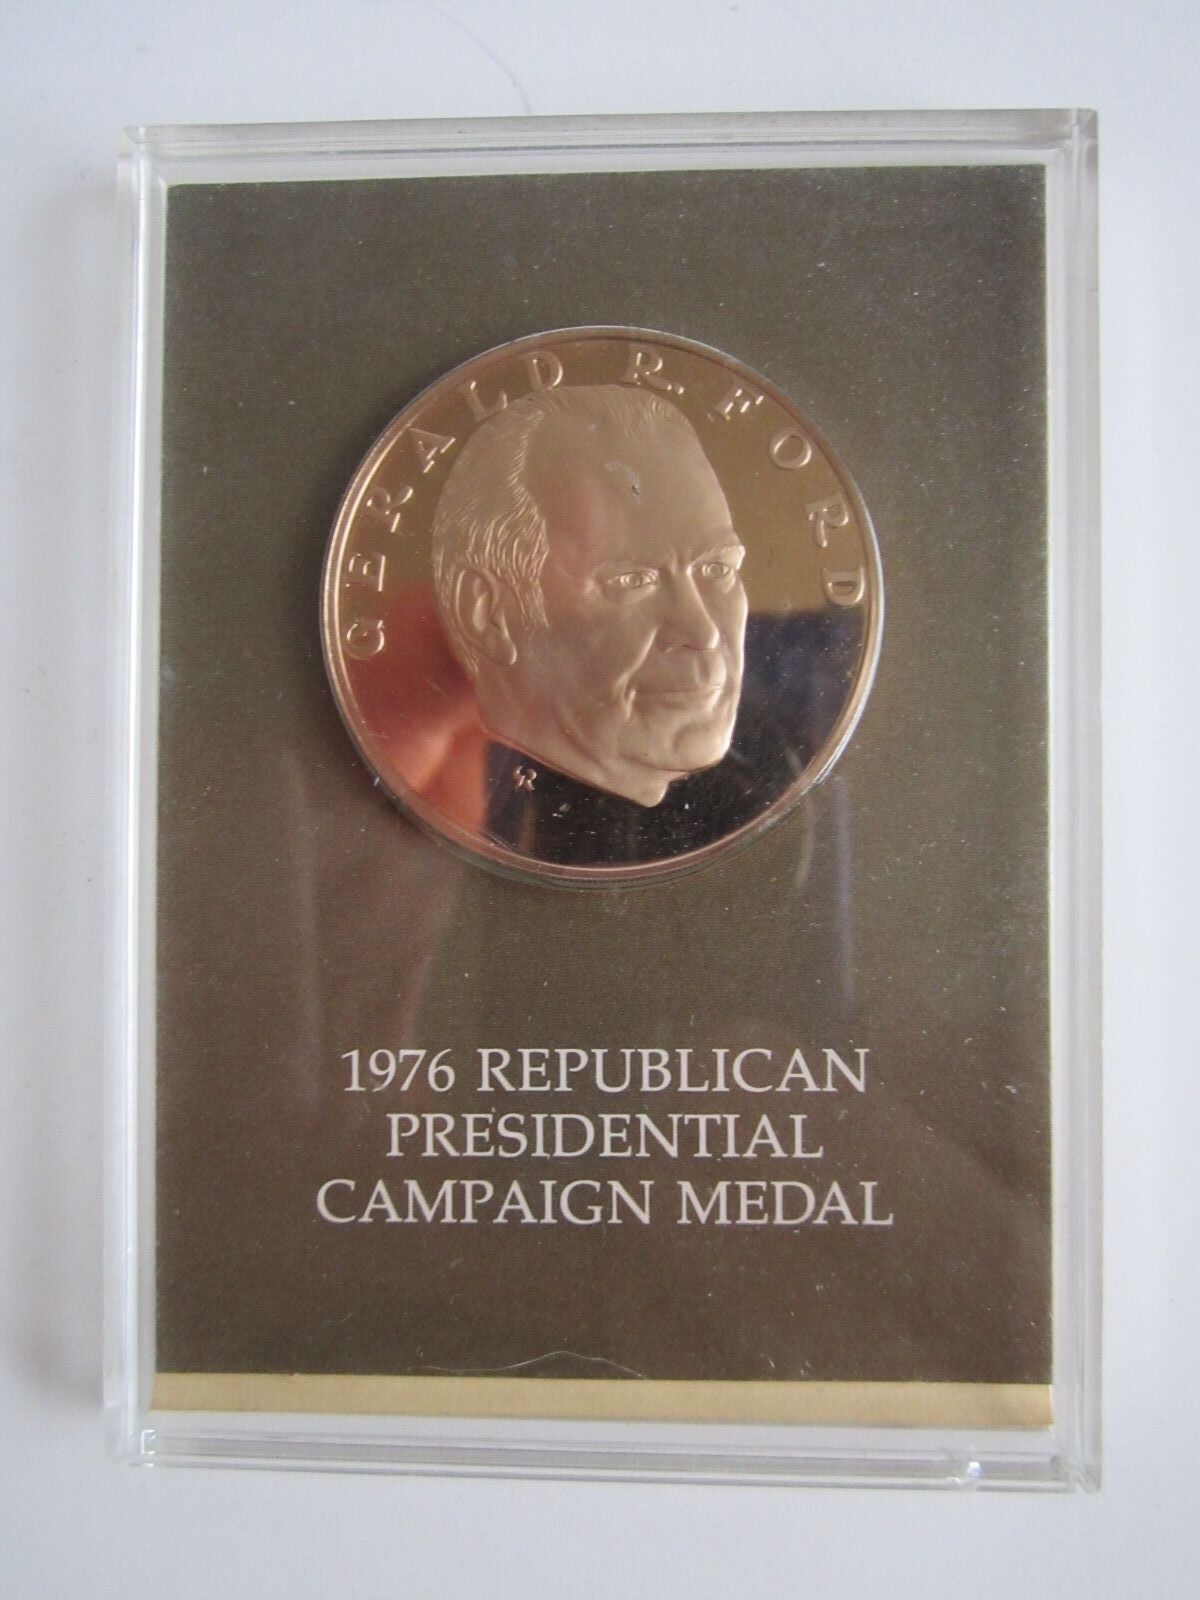 1976 GERALD FORD REPUBLICAN PRESIDENTIAL CAMPAIGN MEDAL - BRONZE - PROOF - BMA